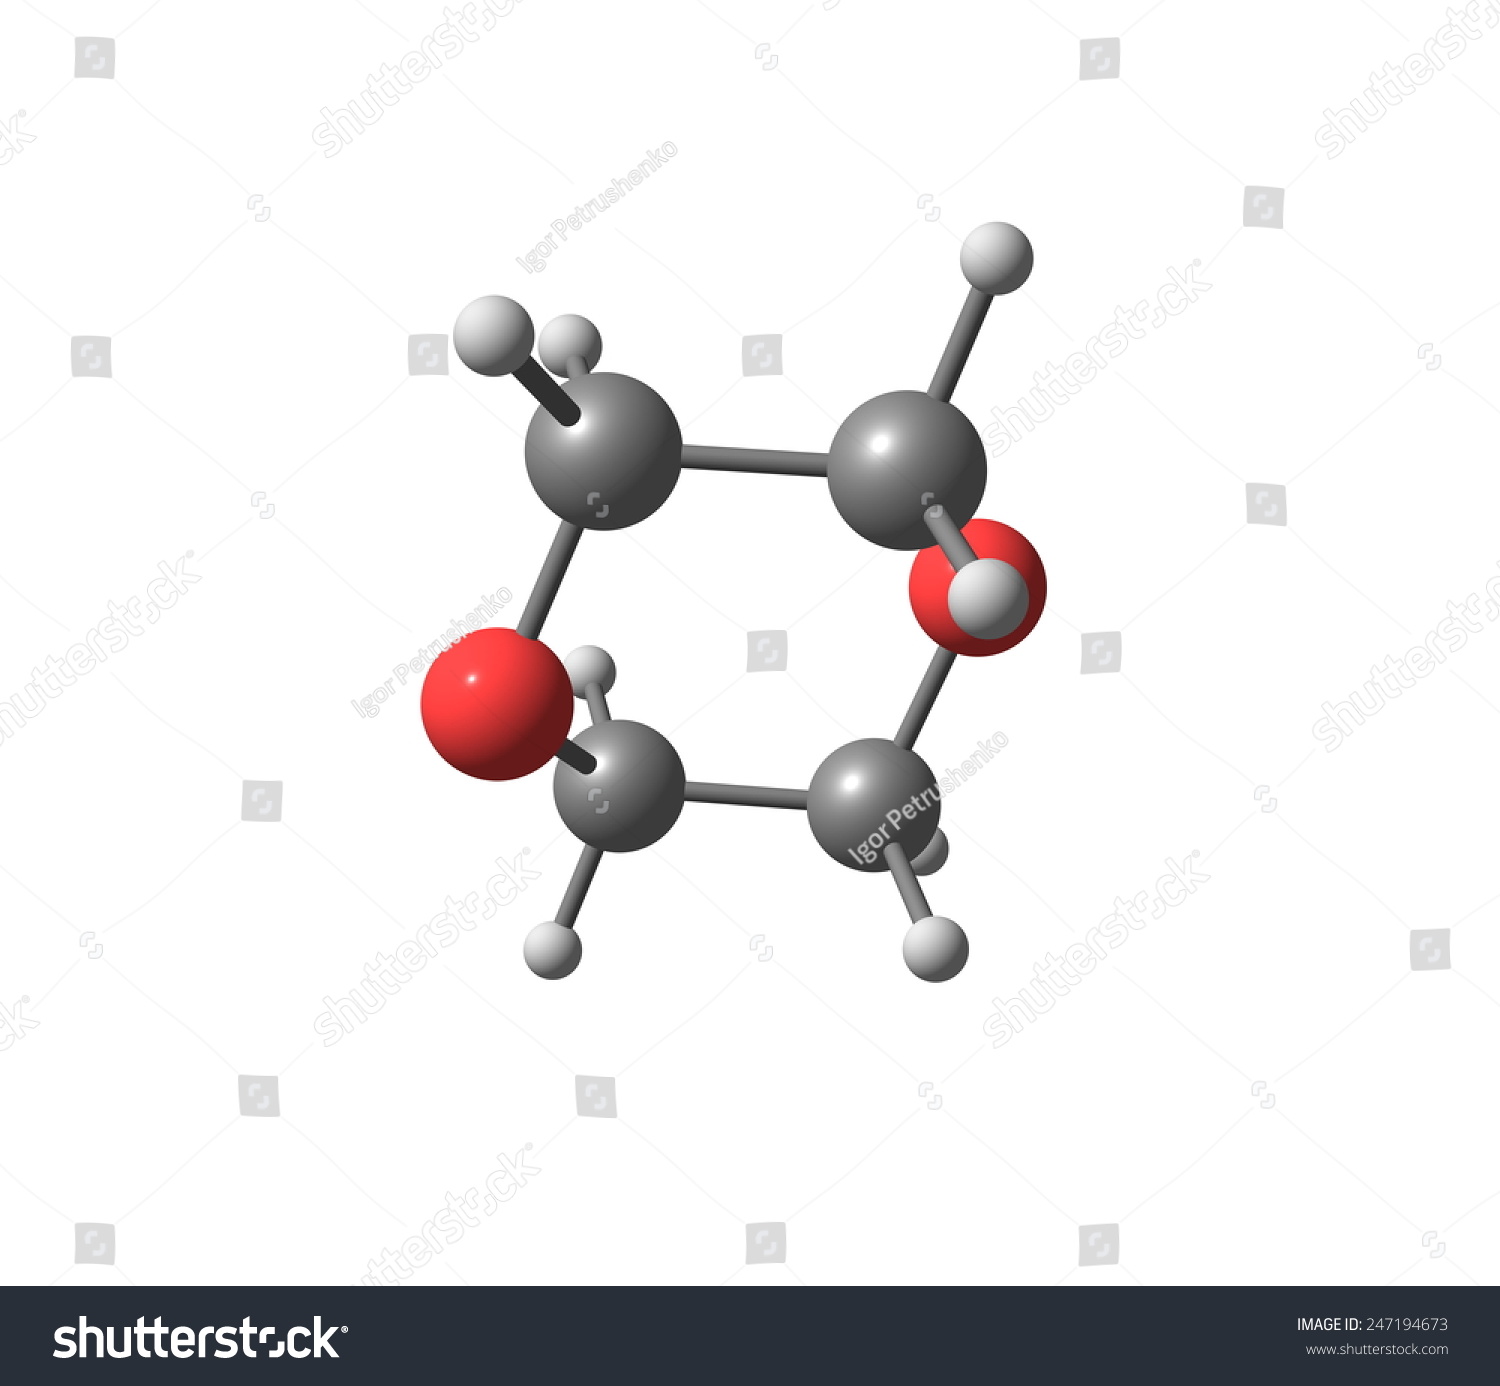 butyl alcohol structure